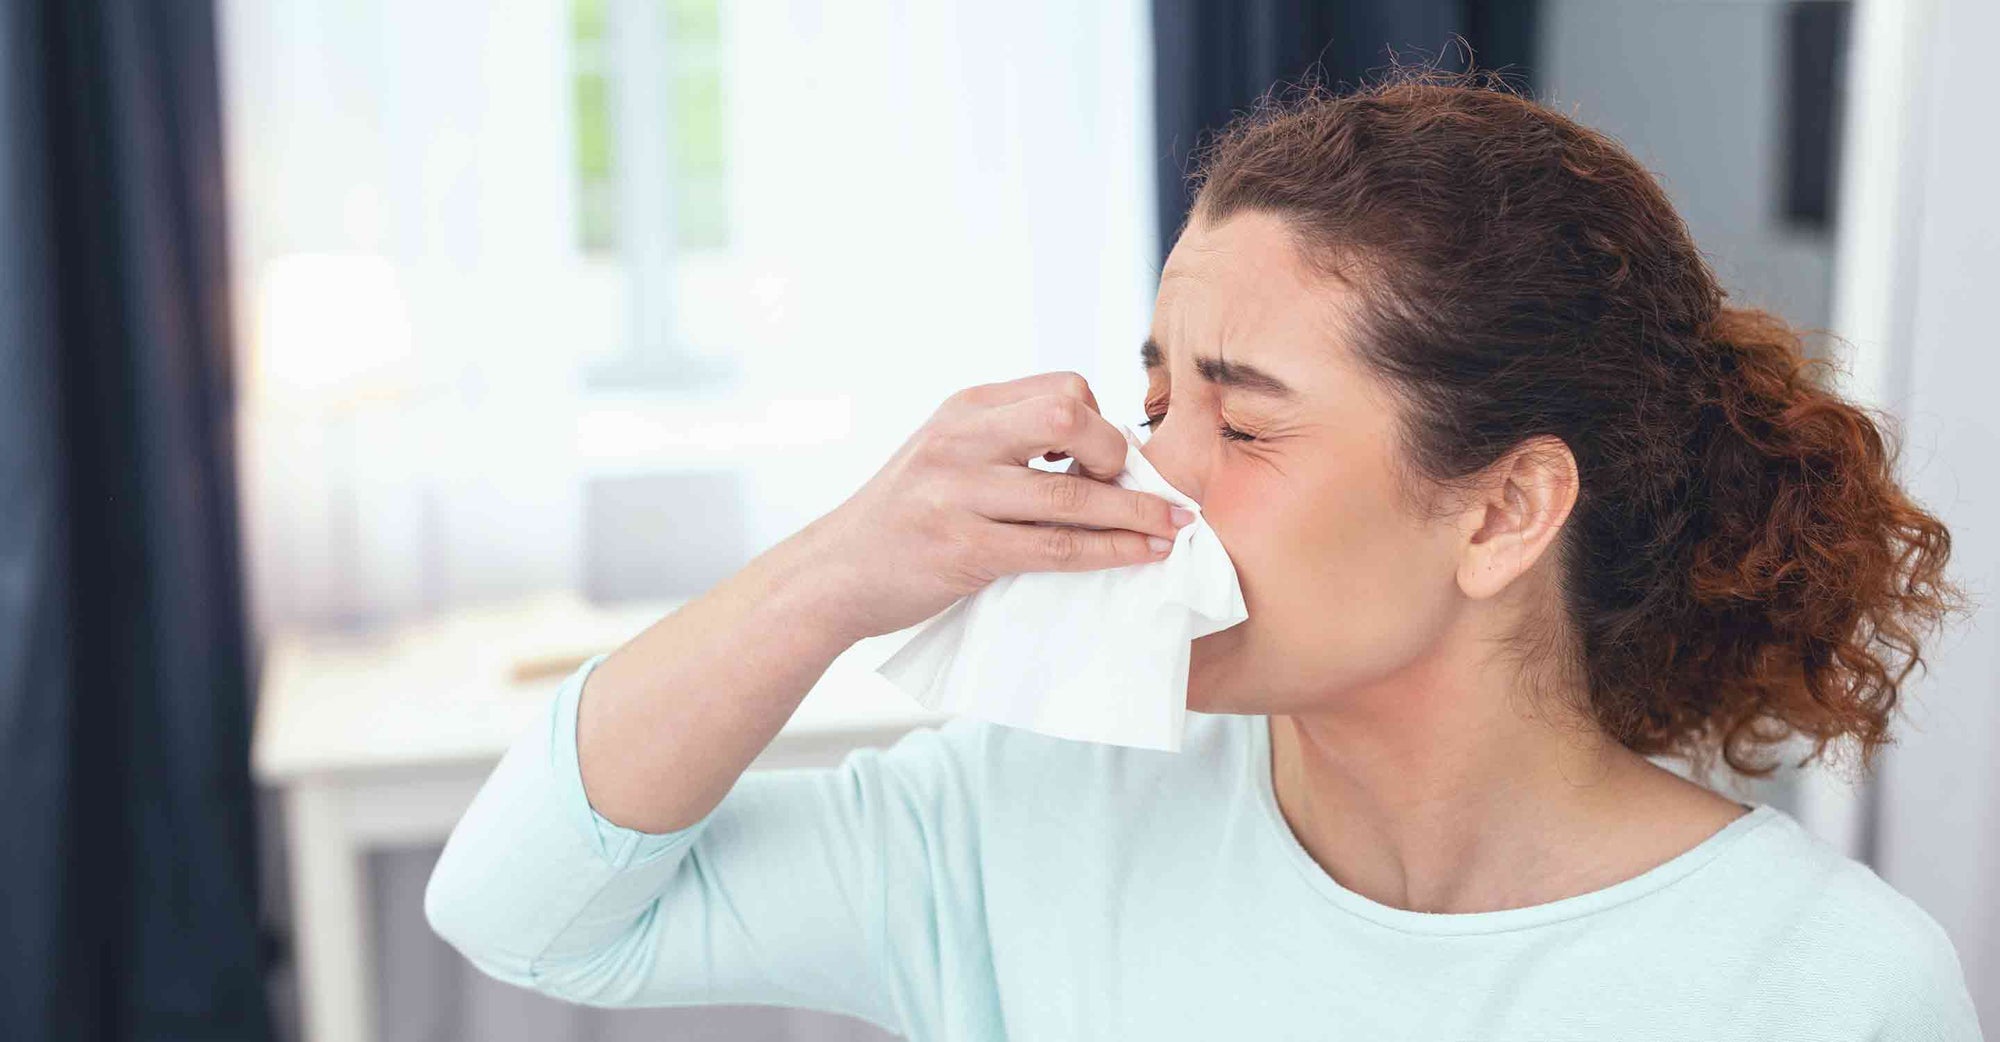 Woman with allergies blows her nose